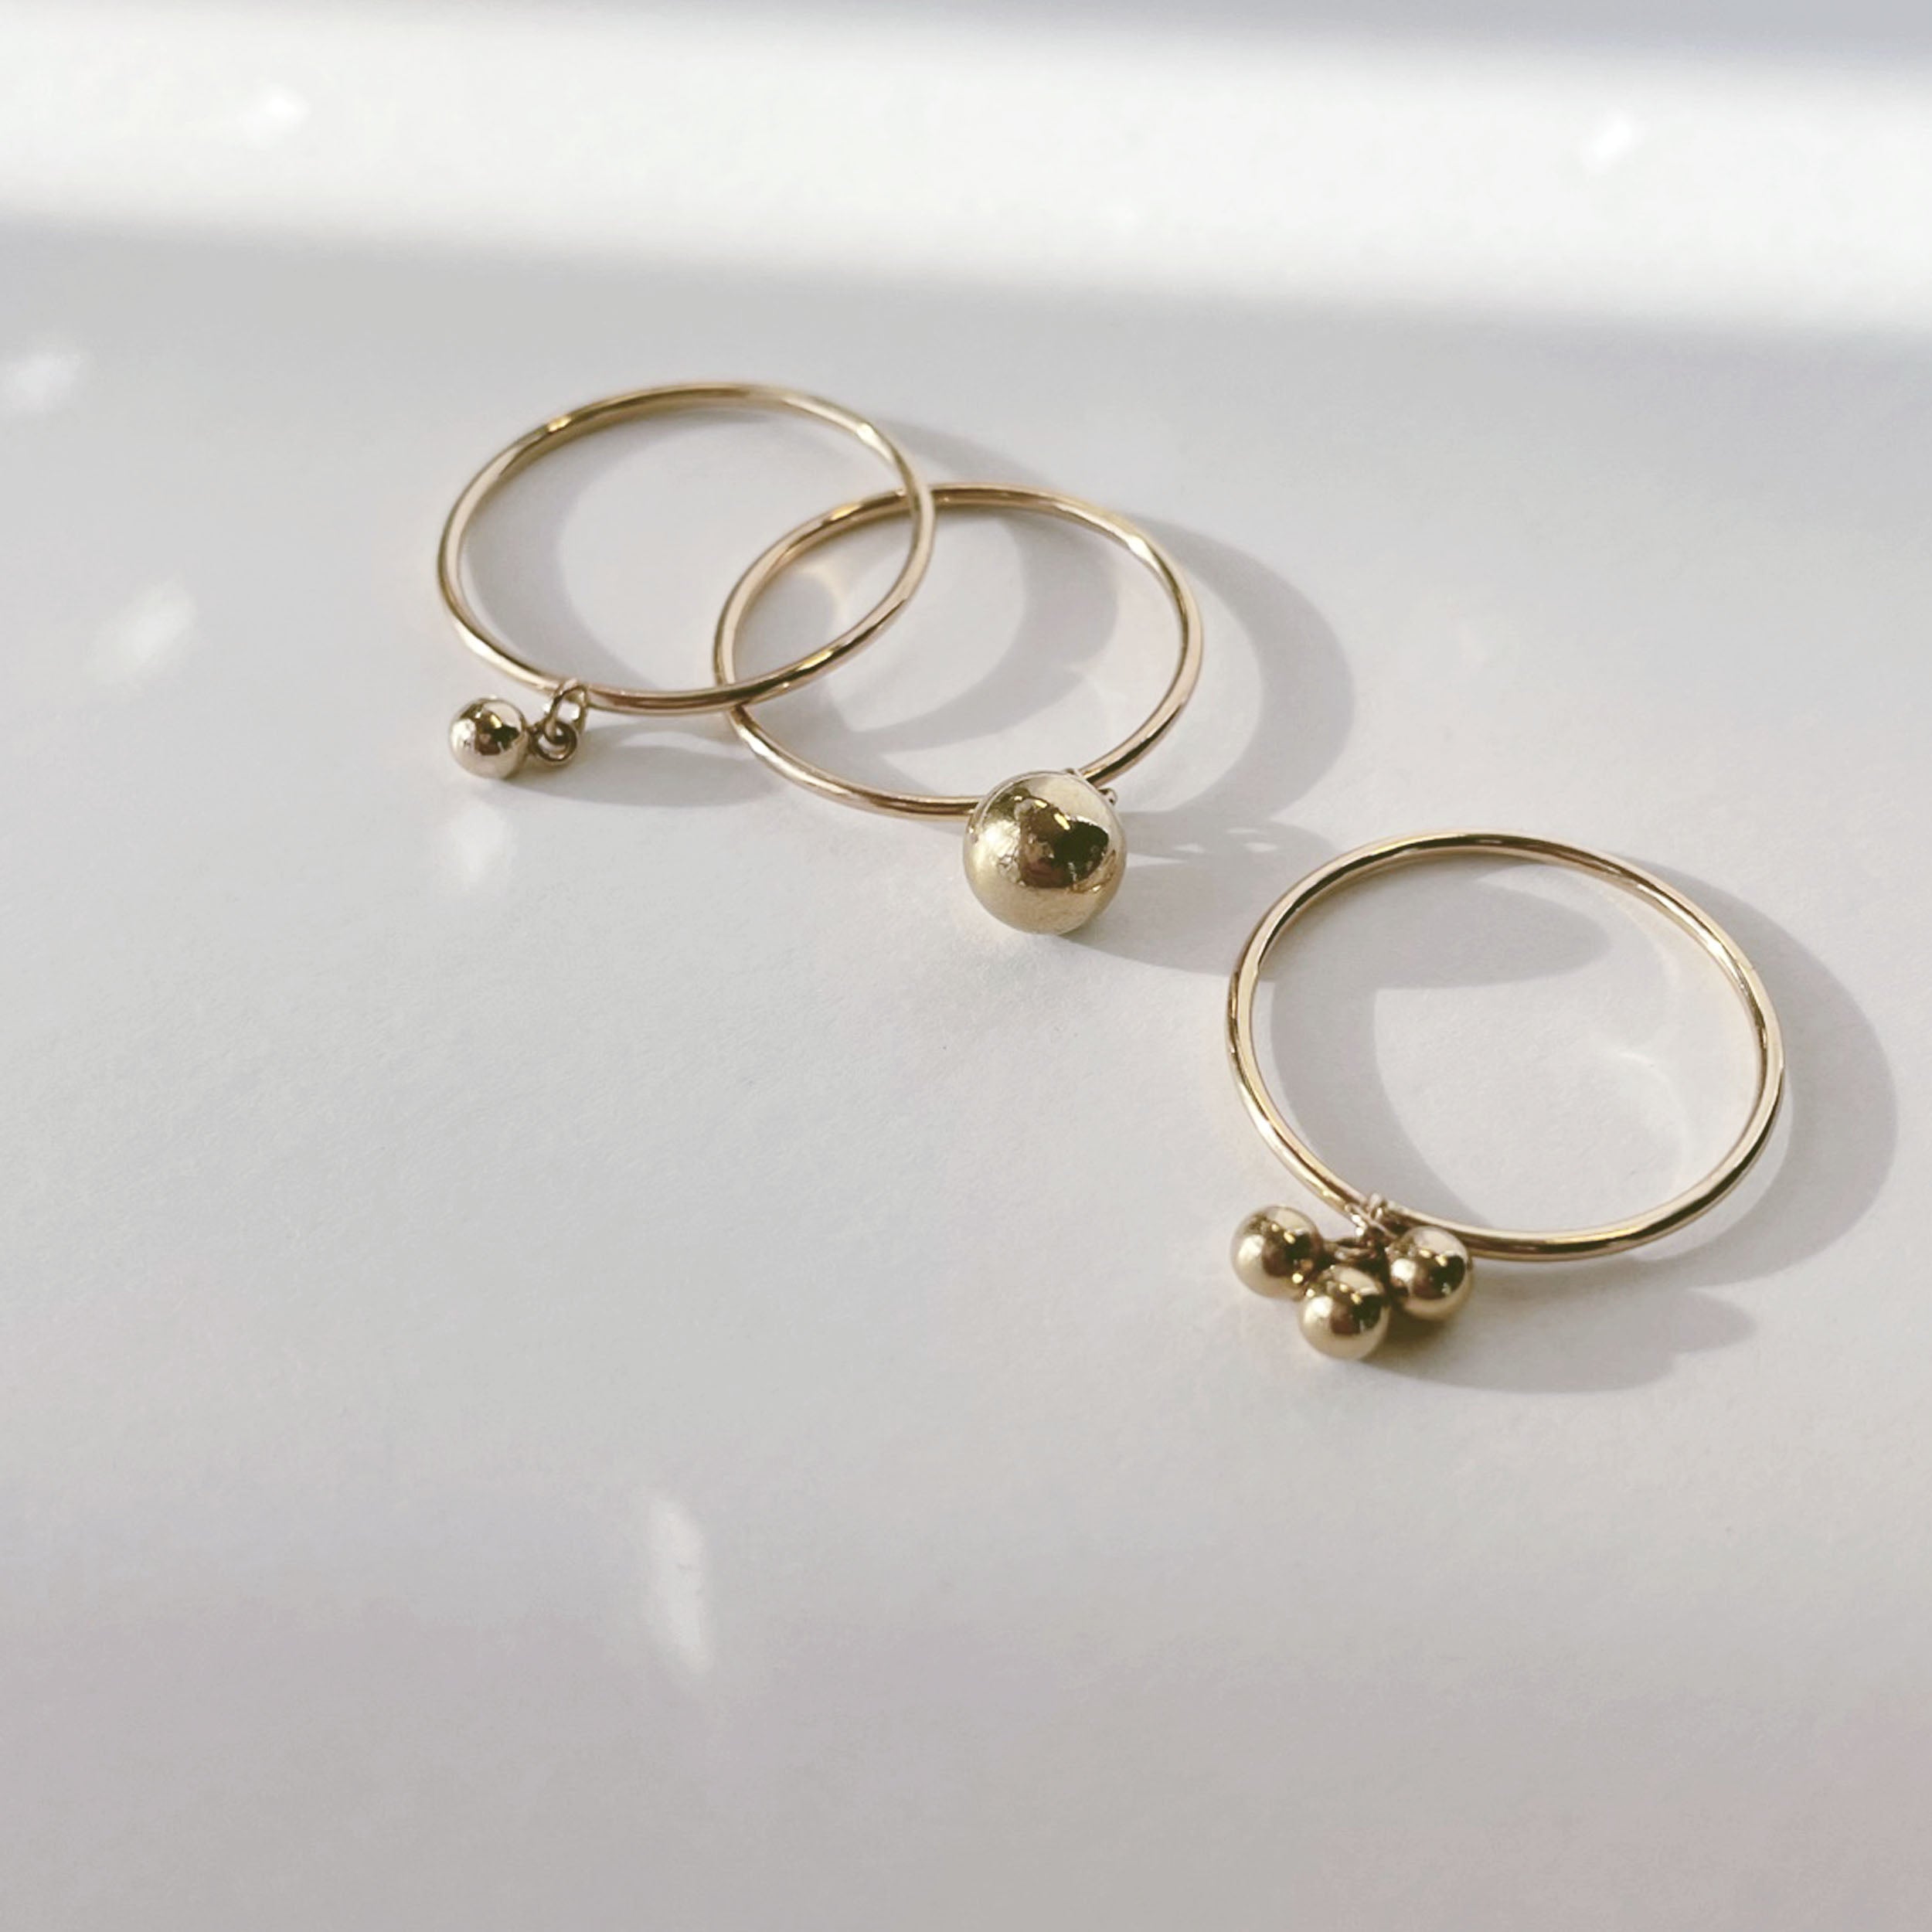 Clacker Cocktail Ring Set - Favor Jewelry